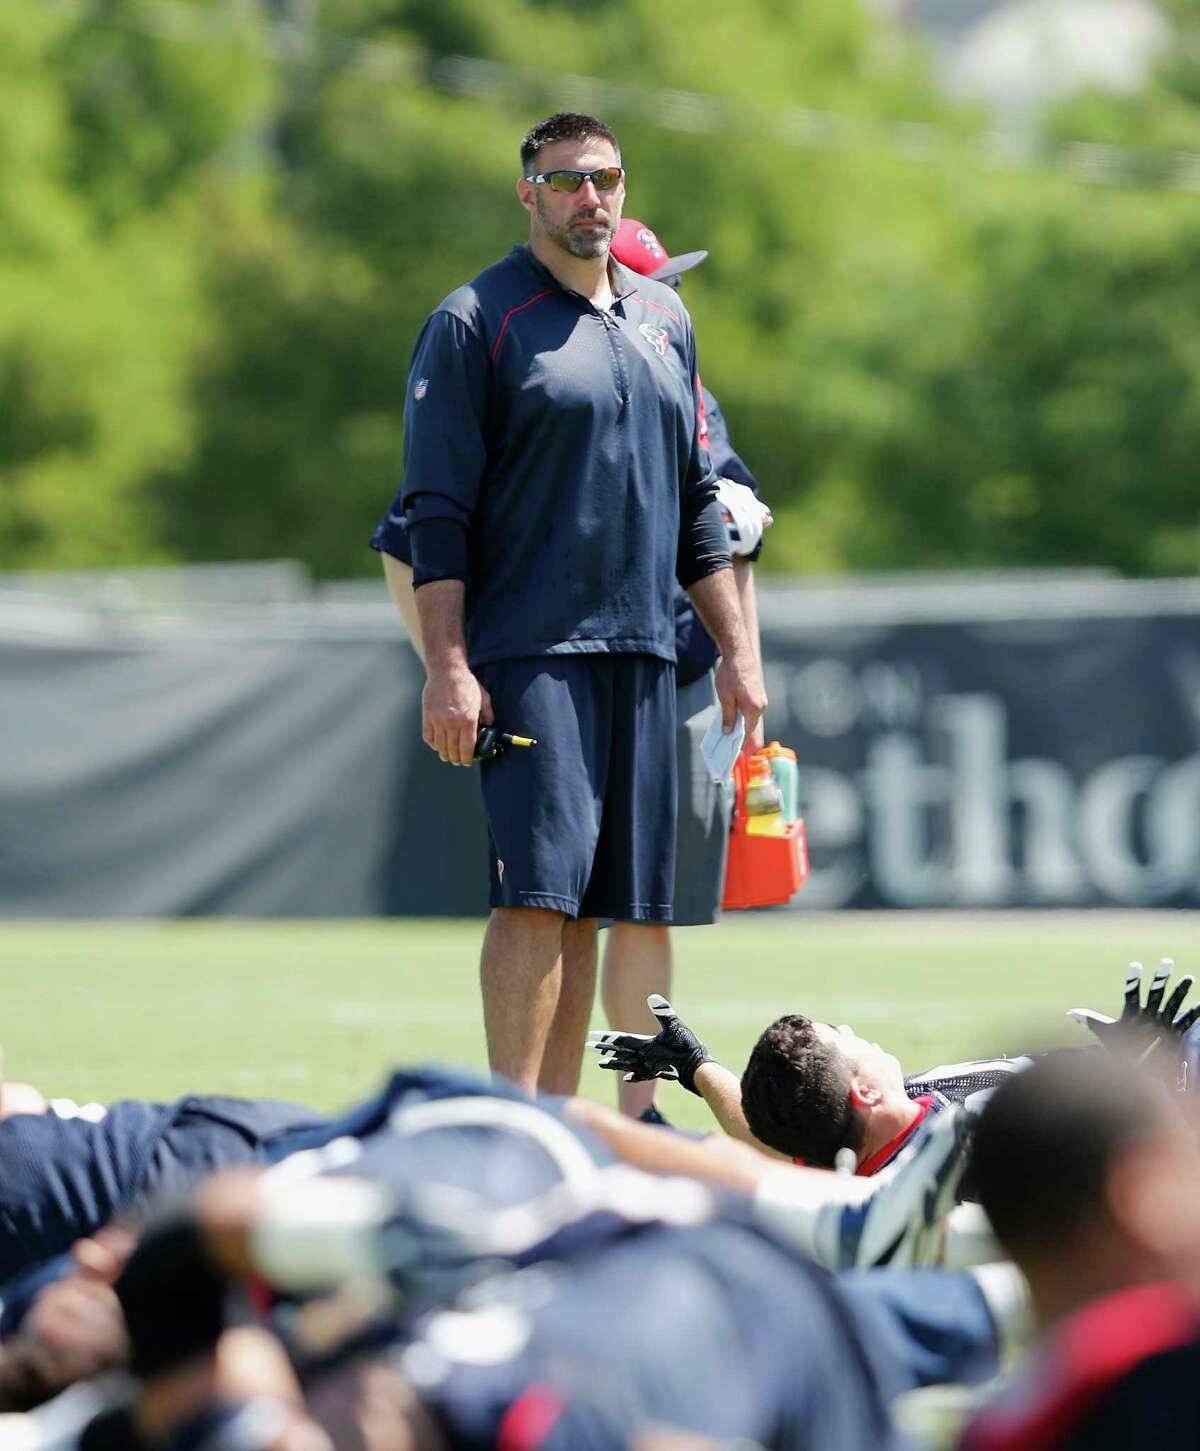 The intense Mike Vrabel takes over as defensive coordinator, a change he's enjoyed during OTAs.